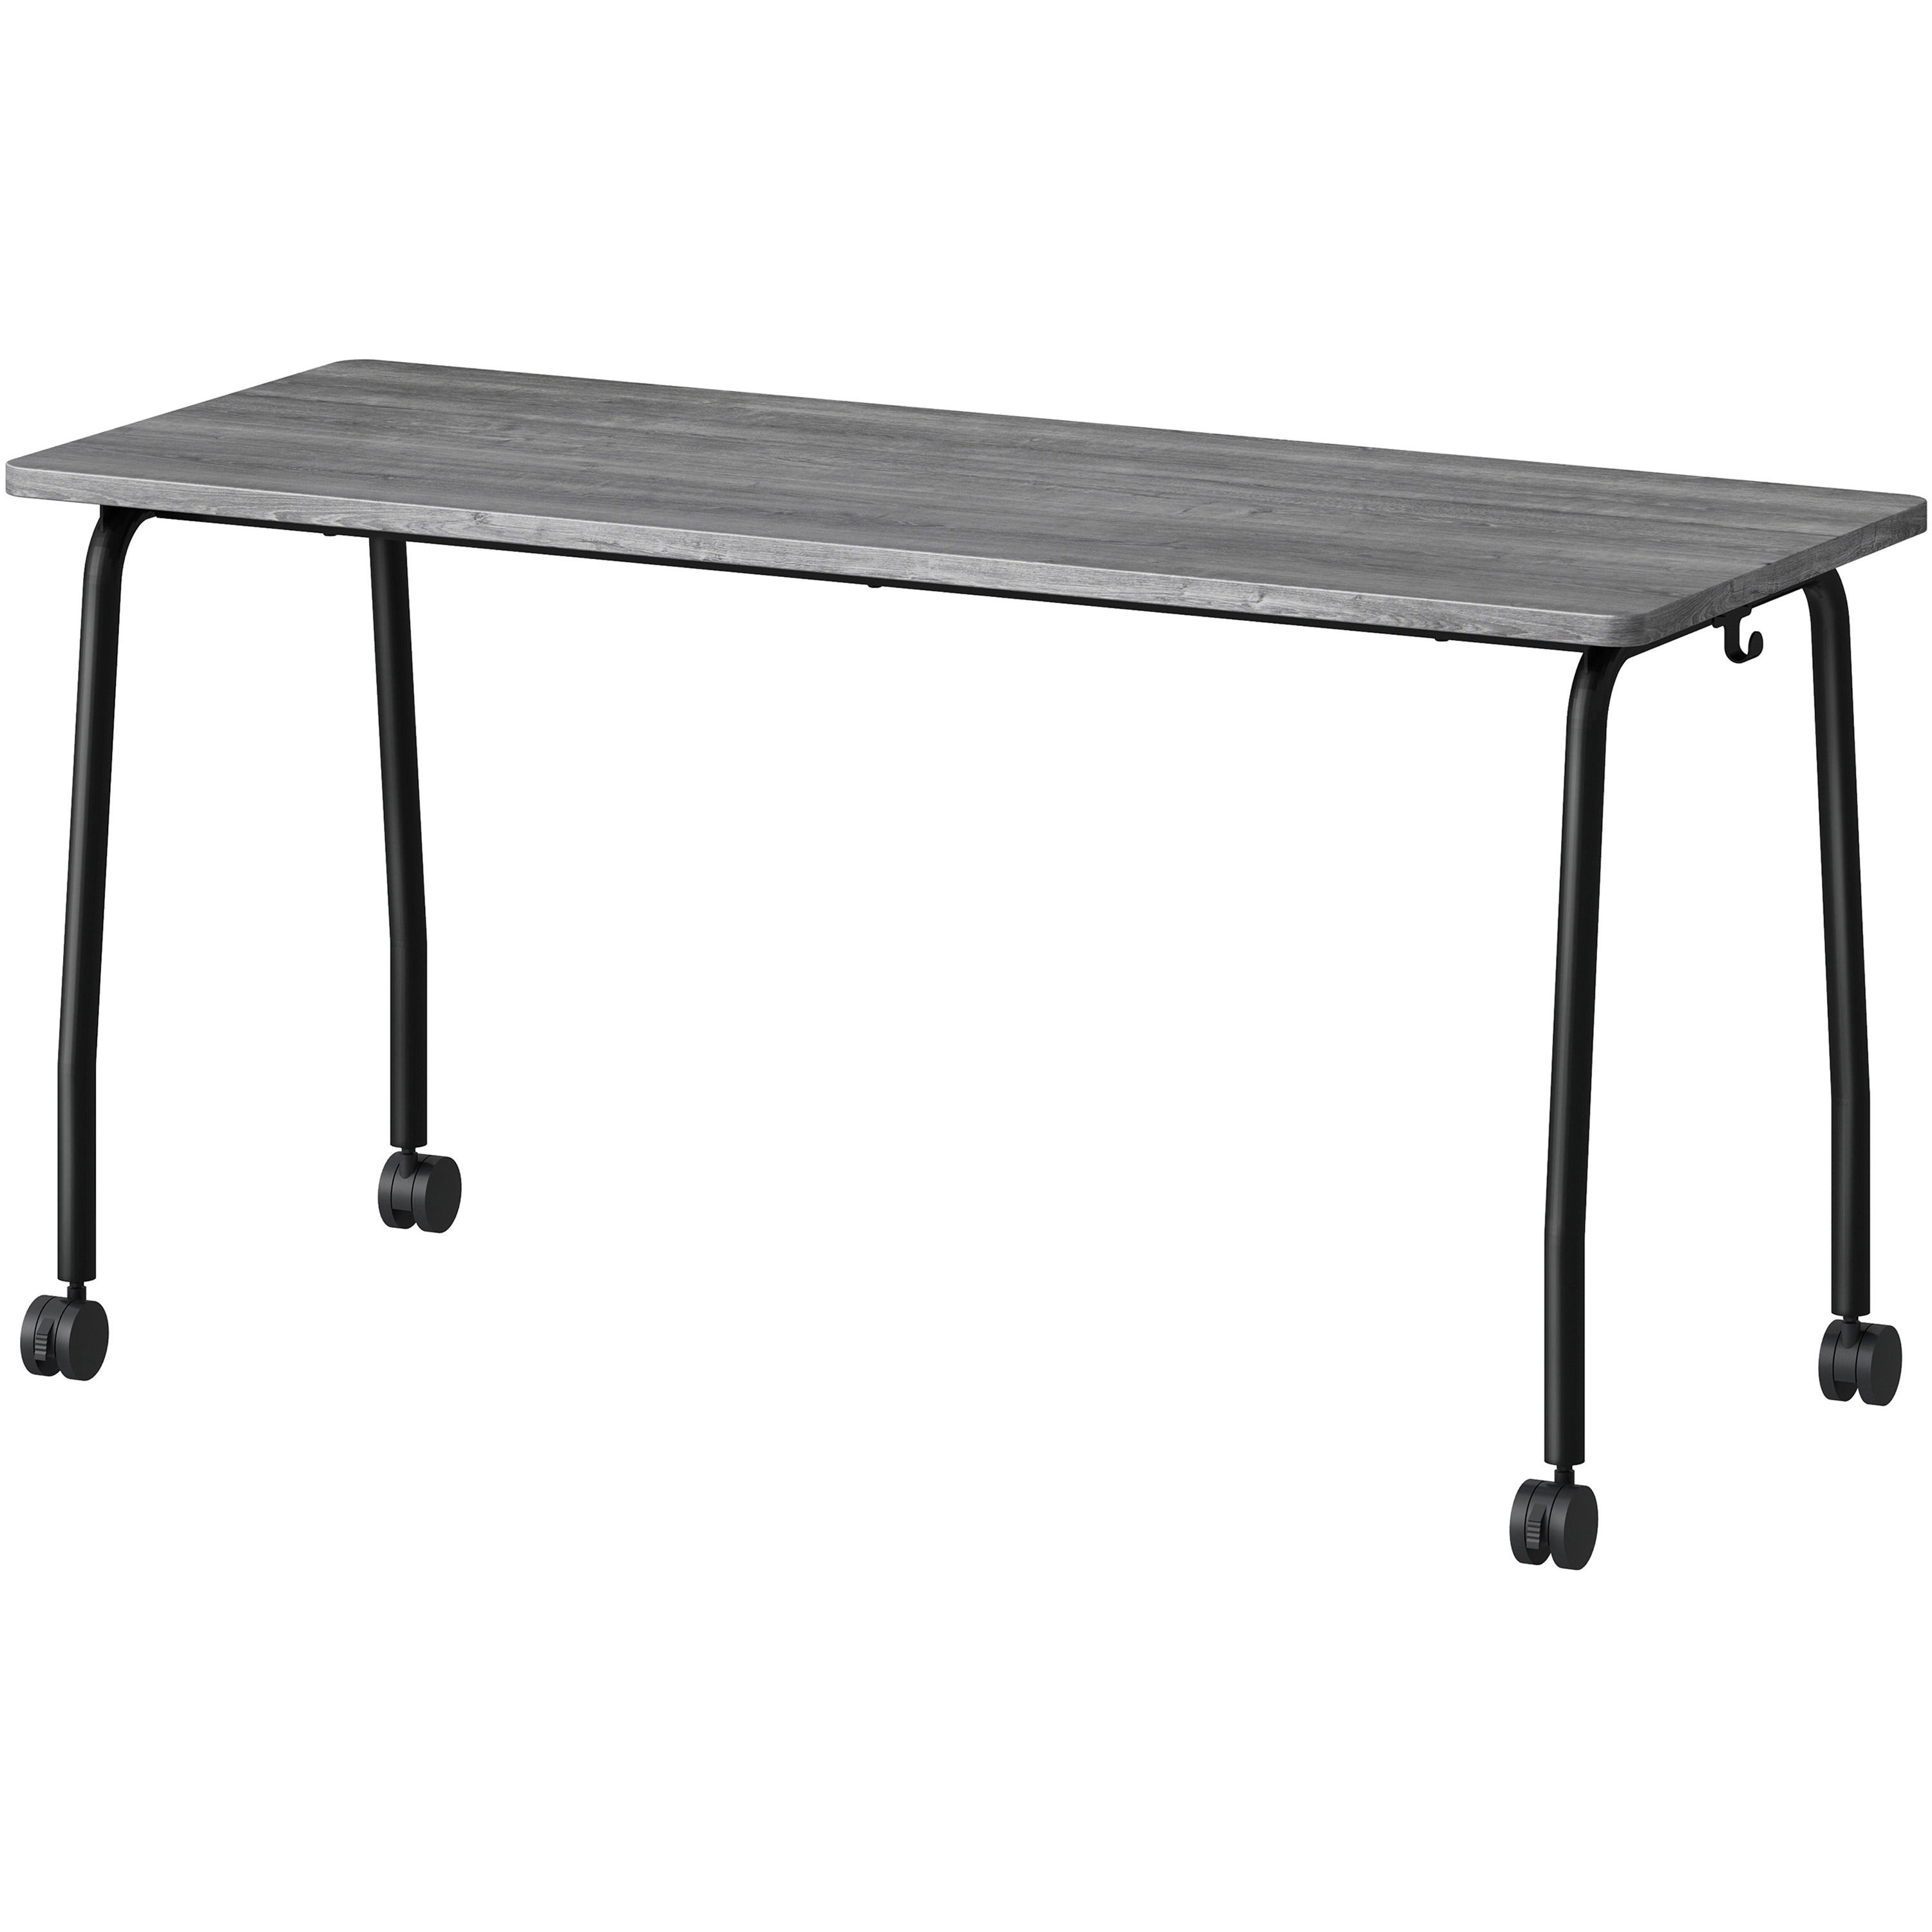 lorell-training-table-for-table-toplaminated-top-300-lb-capacity-2950-table-top-length-x-2363-table-top-width-x-1-table-top-thickness-59-height-assembly-required-weathered-charcoal-particleboard-top-material-1-each_llr60846 - 4